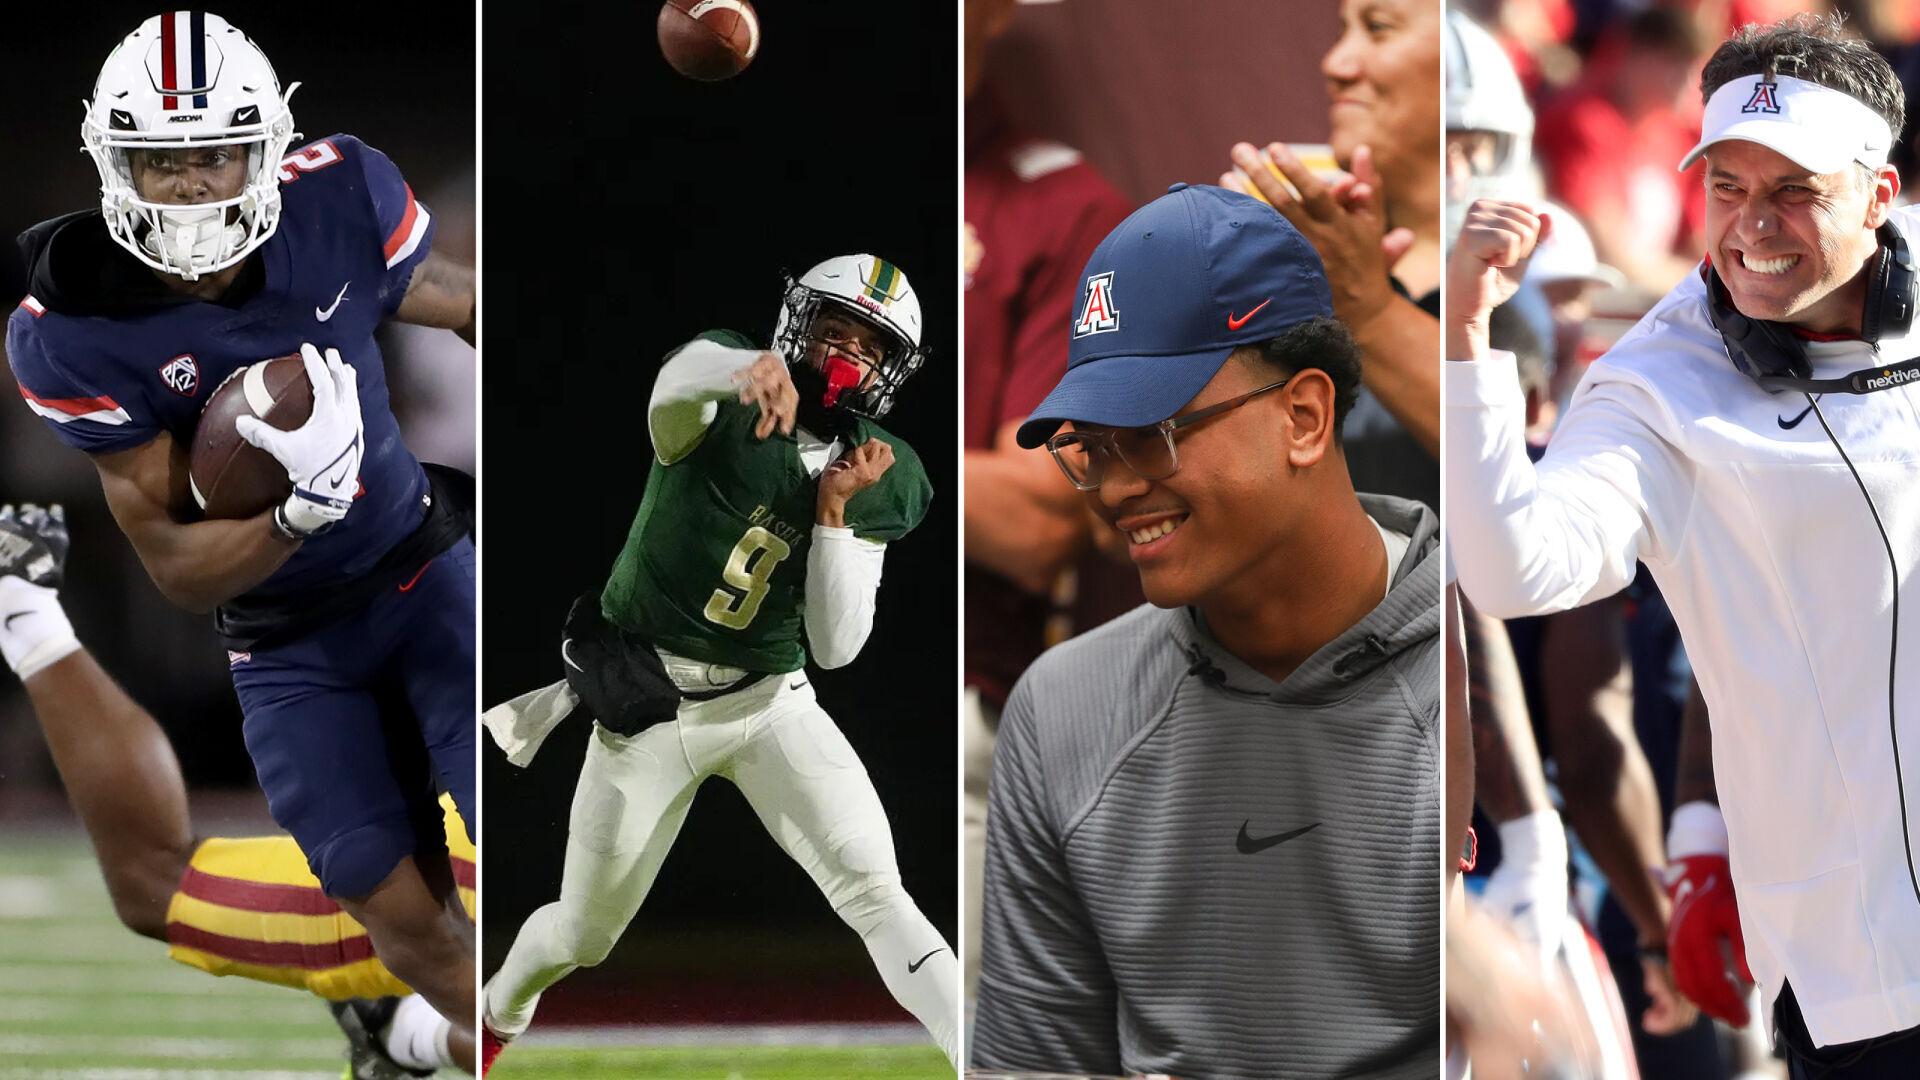 In-state recruiting major focal point for Arizona football